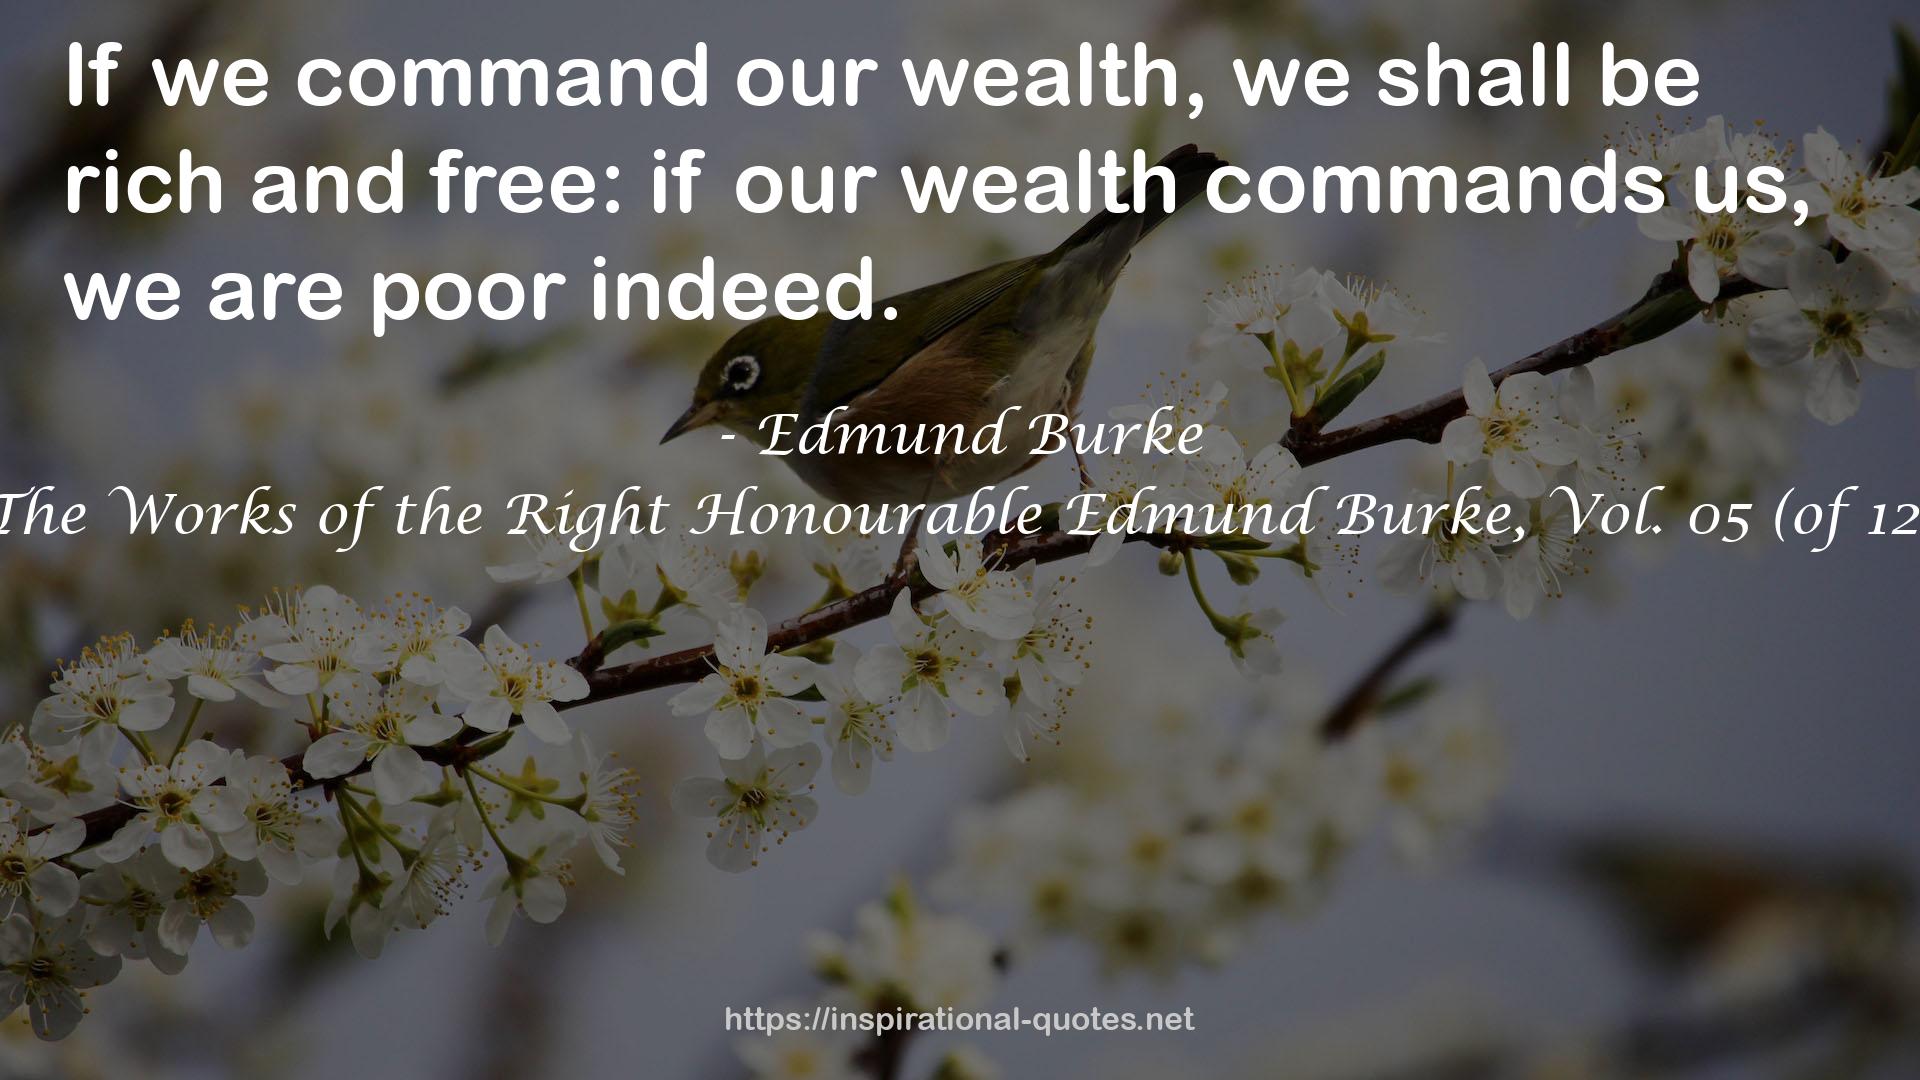 The Works of the Right Honourable Edmund Burke, Vol. 05 (of 12) QUOTES